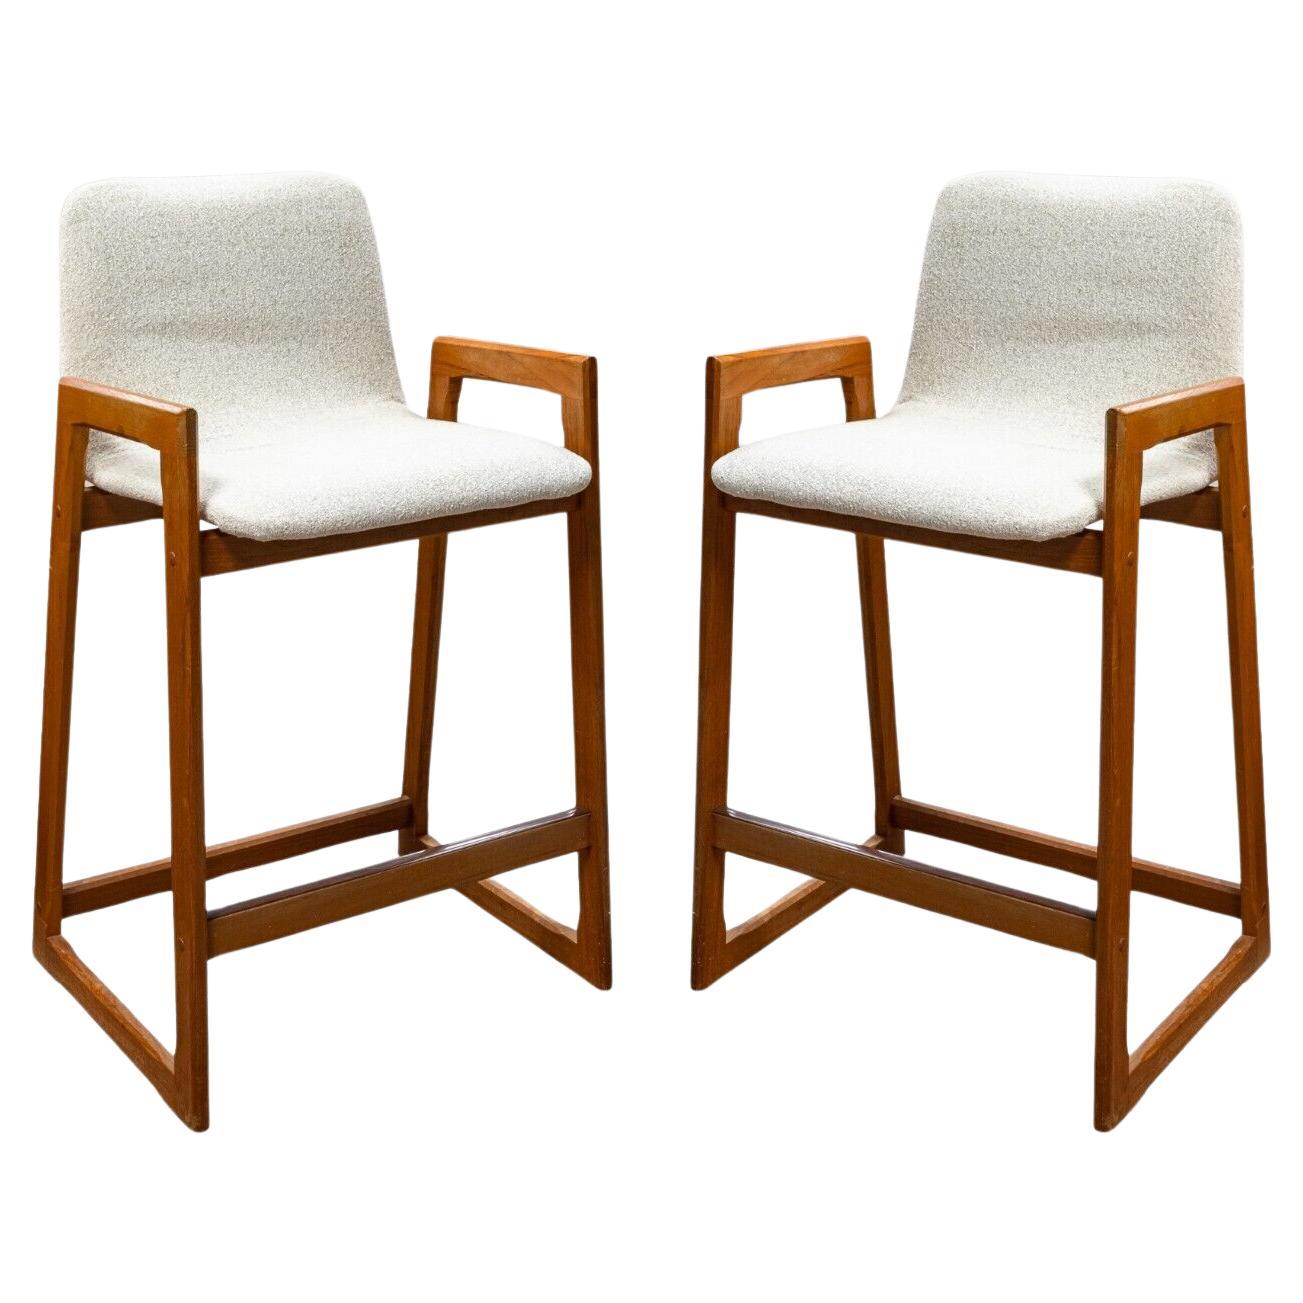 Pair of Danish Mid Century Modern White and Teak Counter Height Barstools For Sale